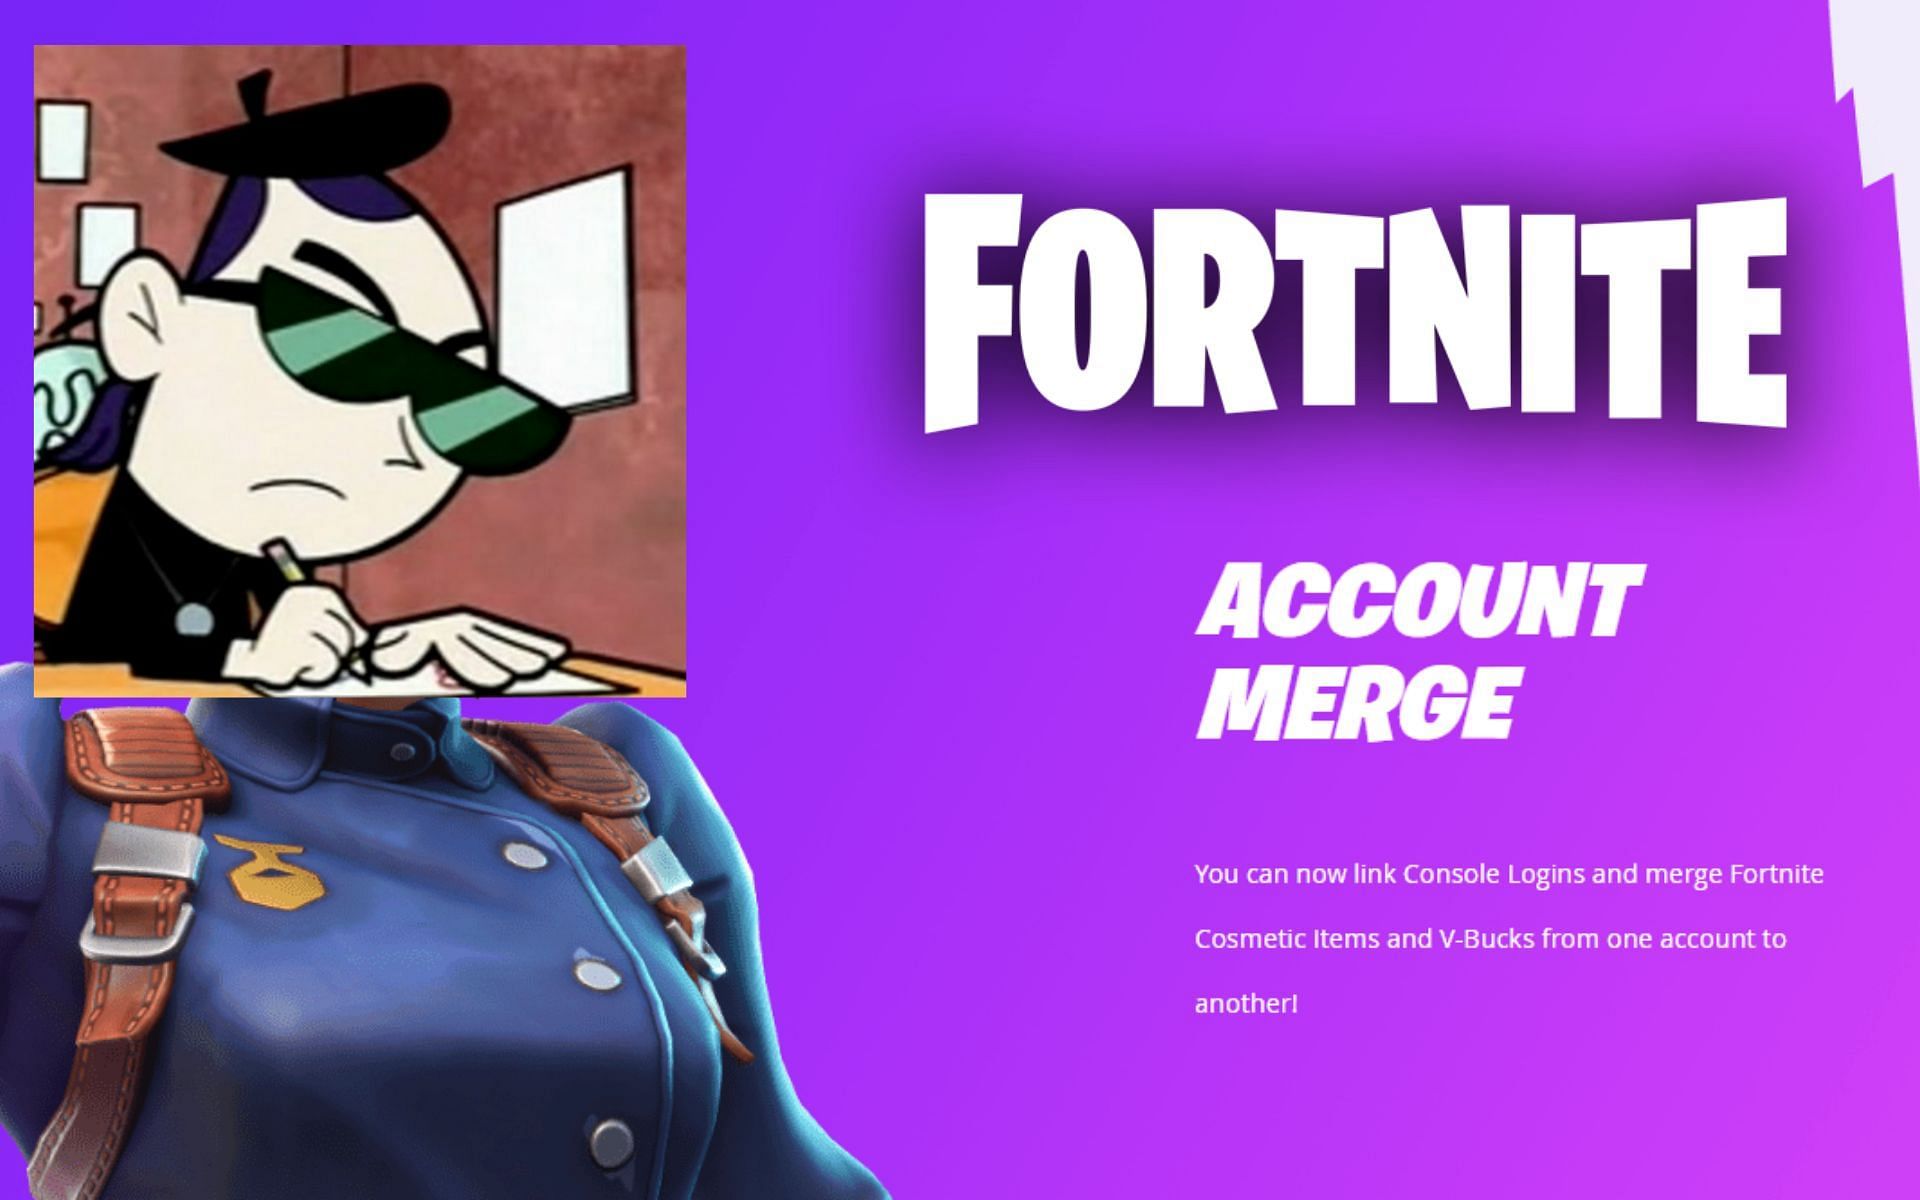 Fortnite Content Creator Italkfortnite Loses Account With Skins Worth Over 10 000 Fans Bash Epic Games